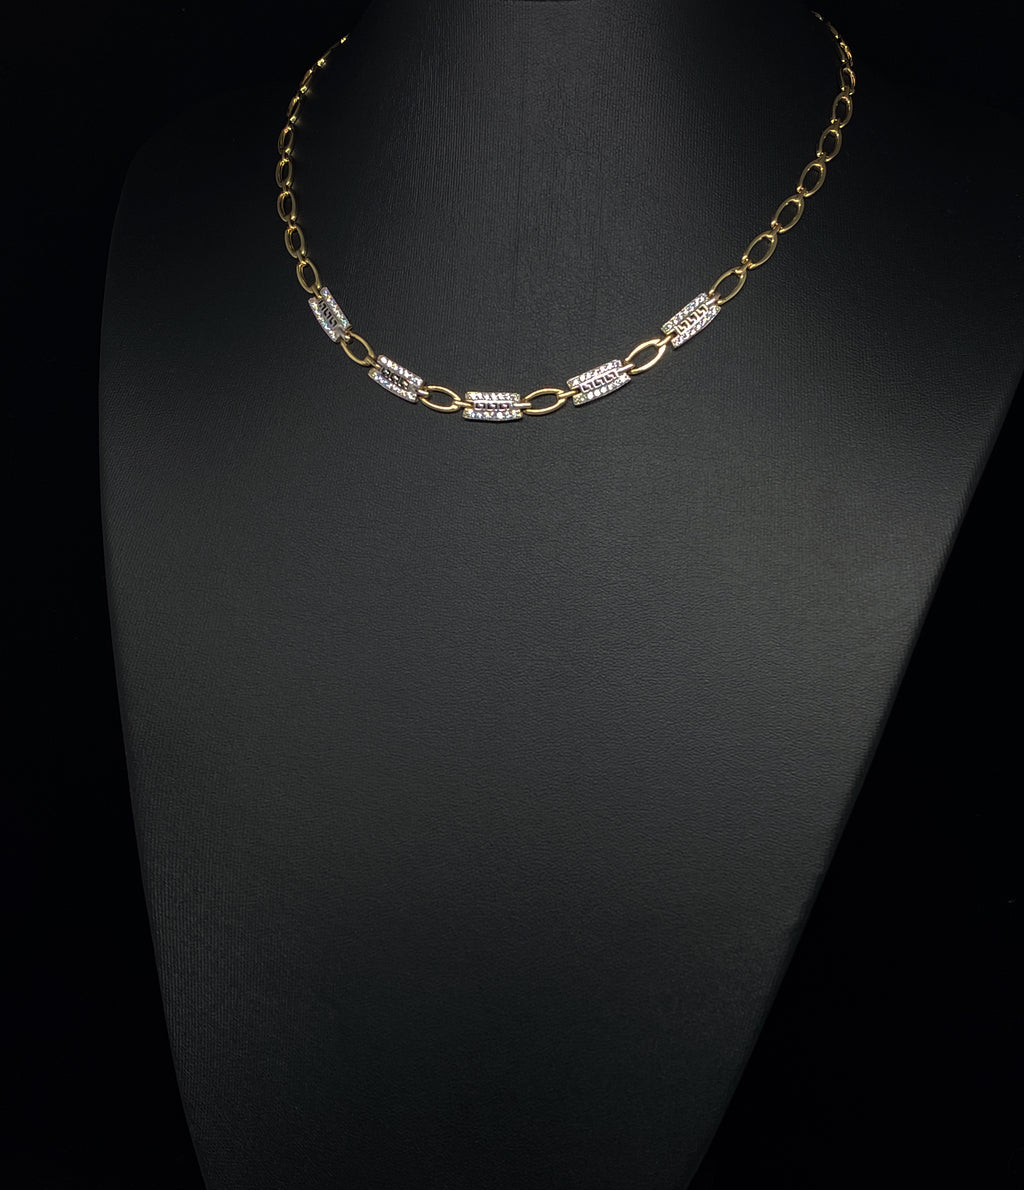 VERSACE STYLE CUBIC ZIRCONIA YELLOW GOLD NECKLACE